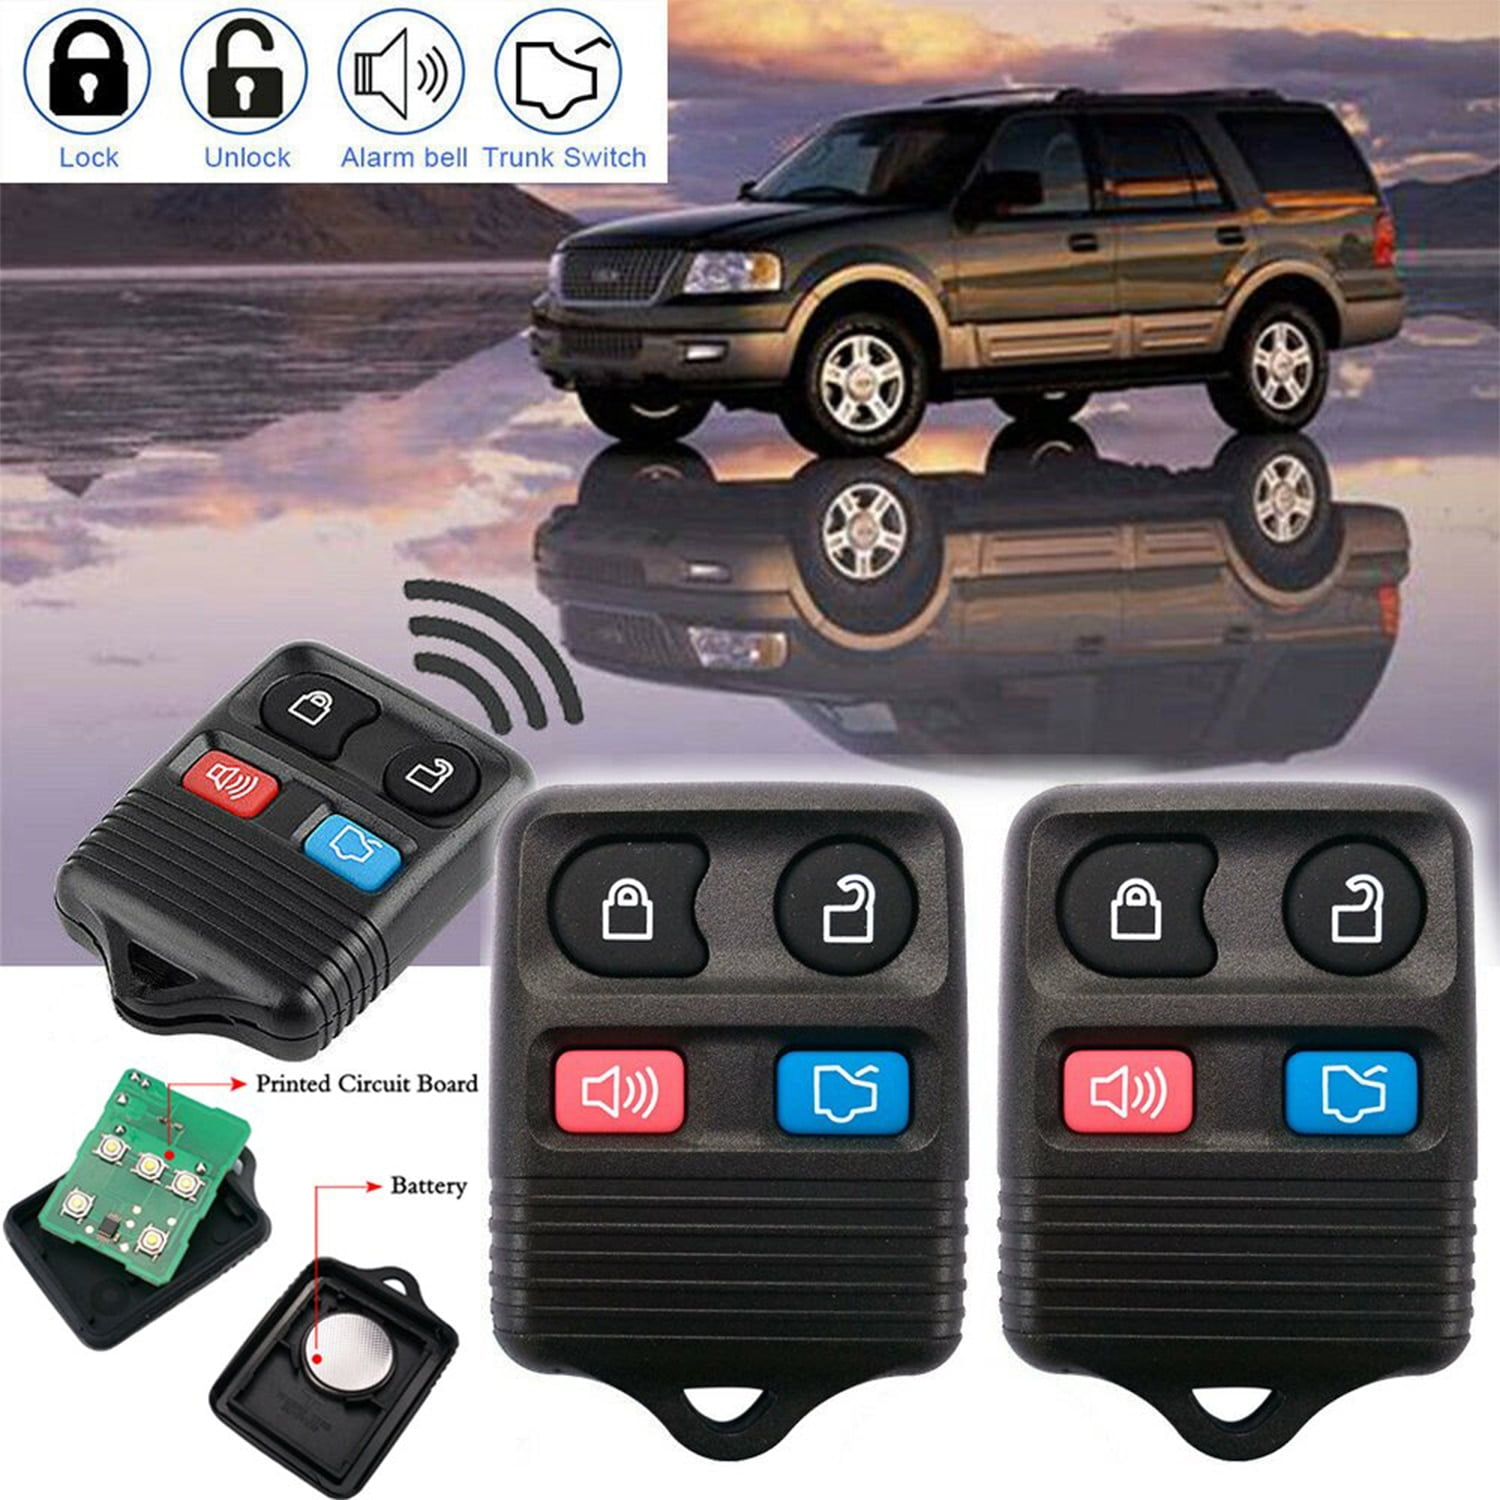 2 Car Key Fob Remote 4B For 2003 2004 2005 2006 2007 2008 2009 Ford Expedition 